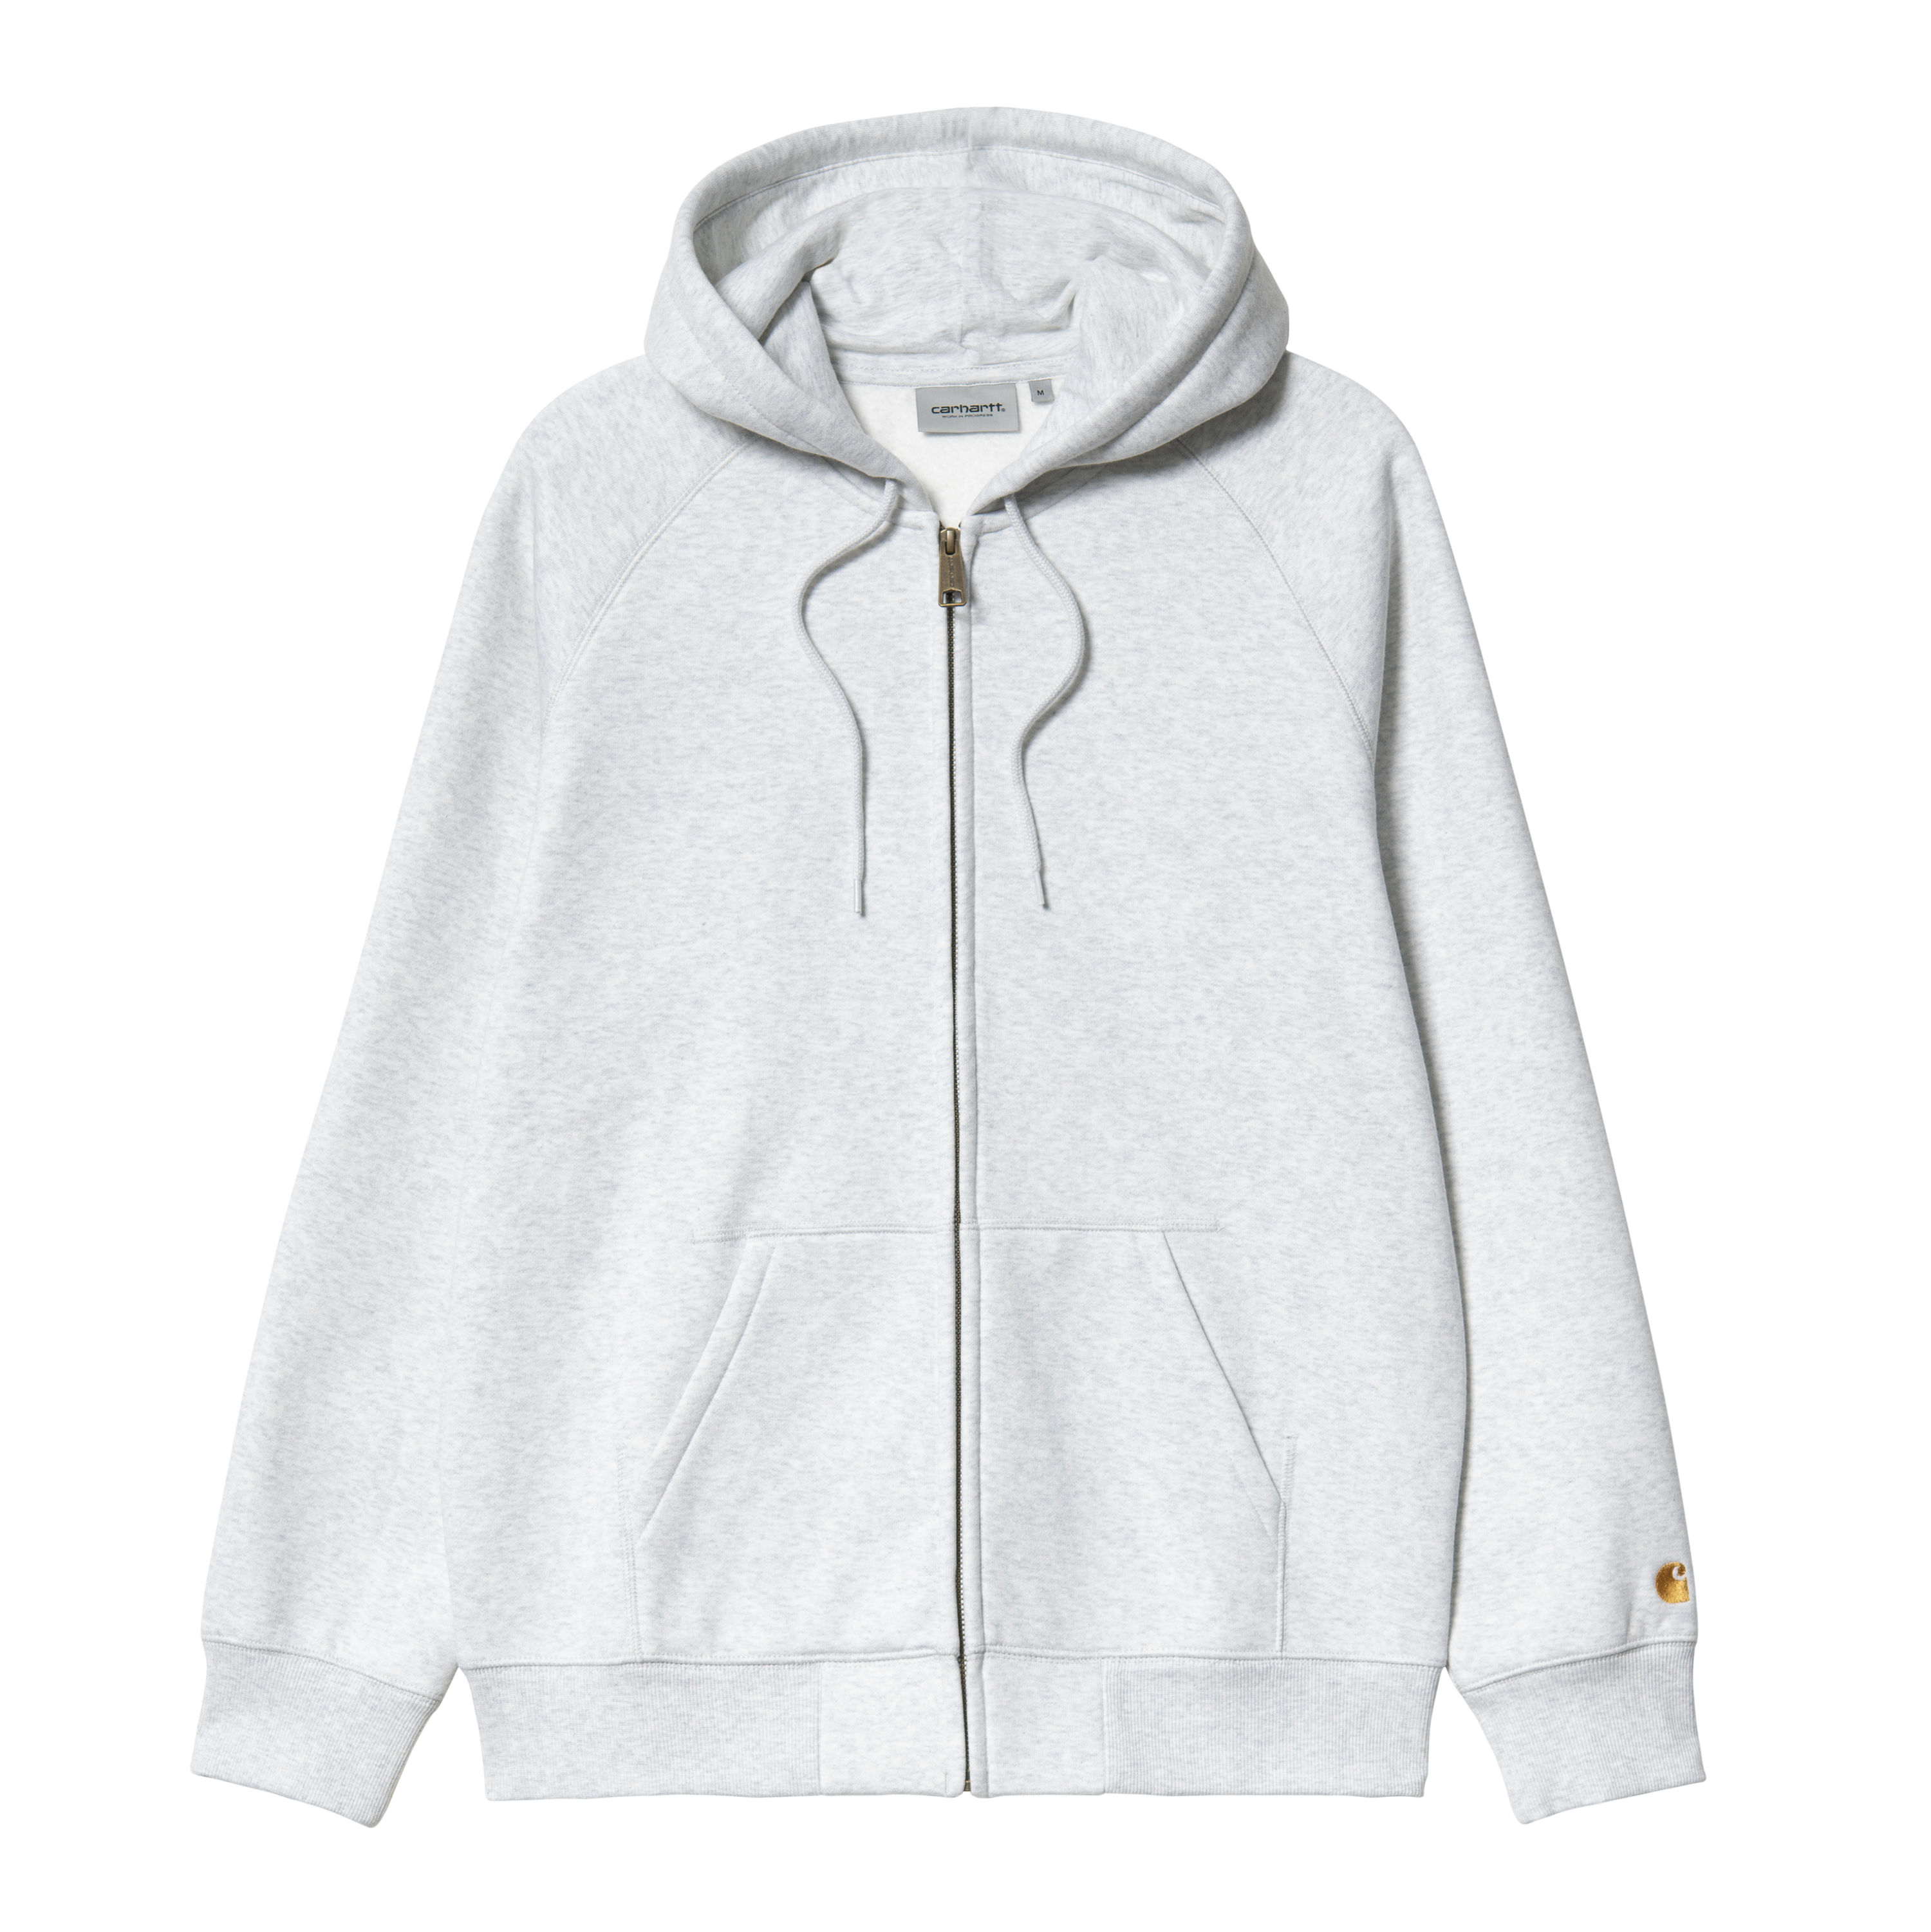 Carhartt WIP Hooded Chase Jacket Gris